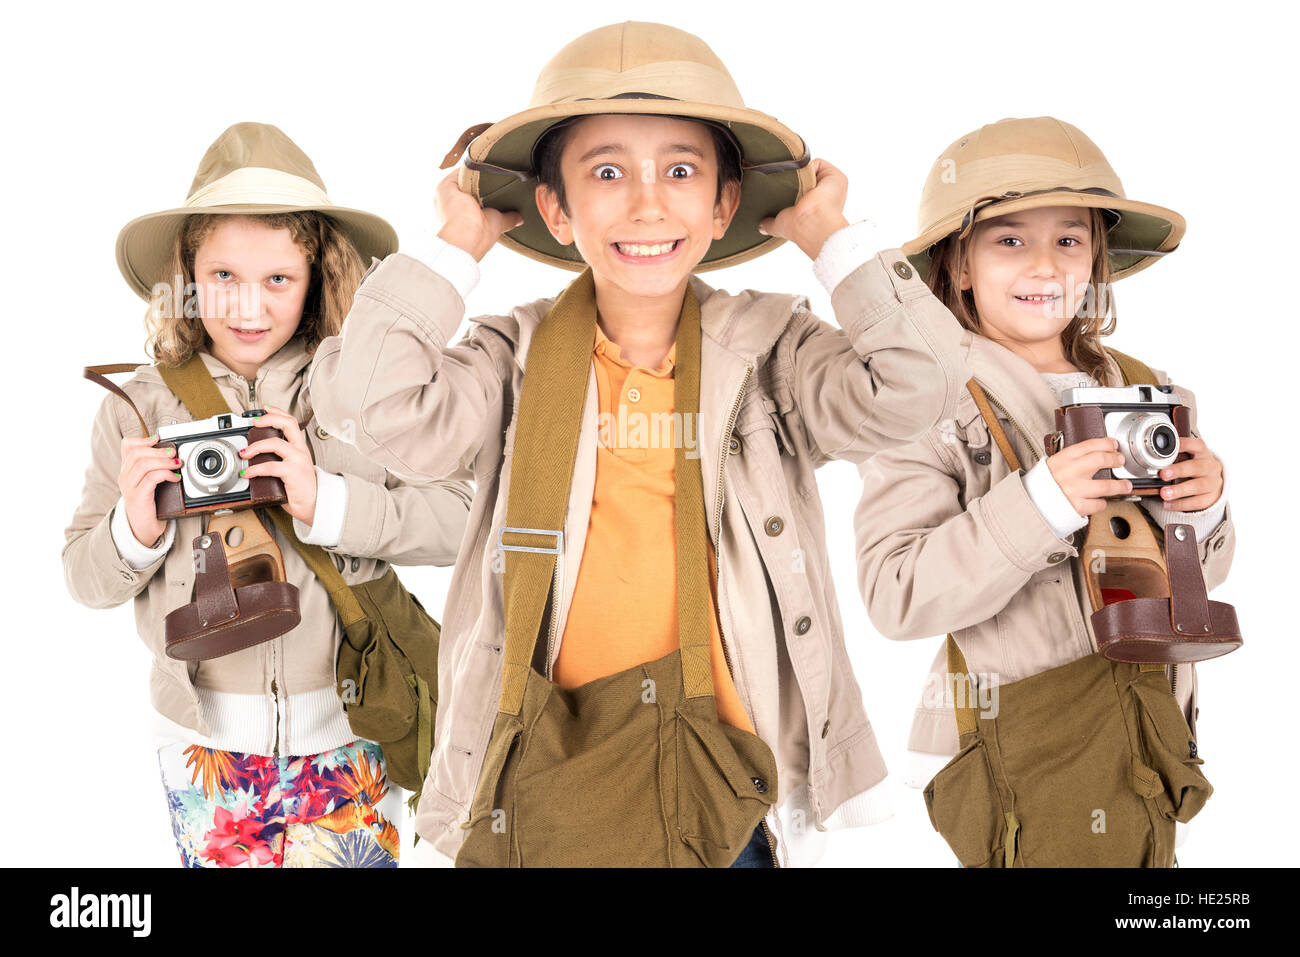 https://c8.alamy.com/comp/HE25RB/group-of-kids-having-fun-with-cameras-in-safari-clothes-HE25RB.jpg